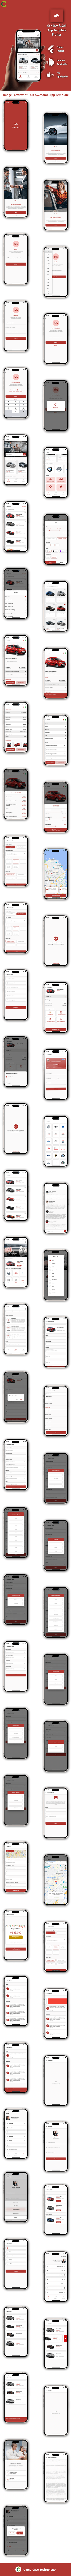 Car Buy & Sell App Template in Flutter | Multi Language | CarMax - 7